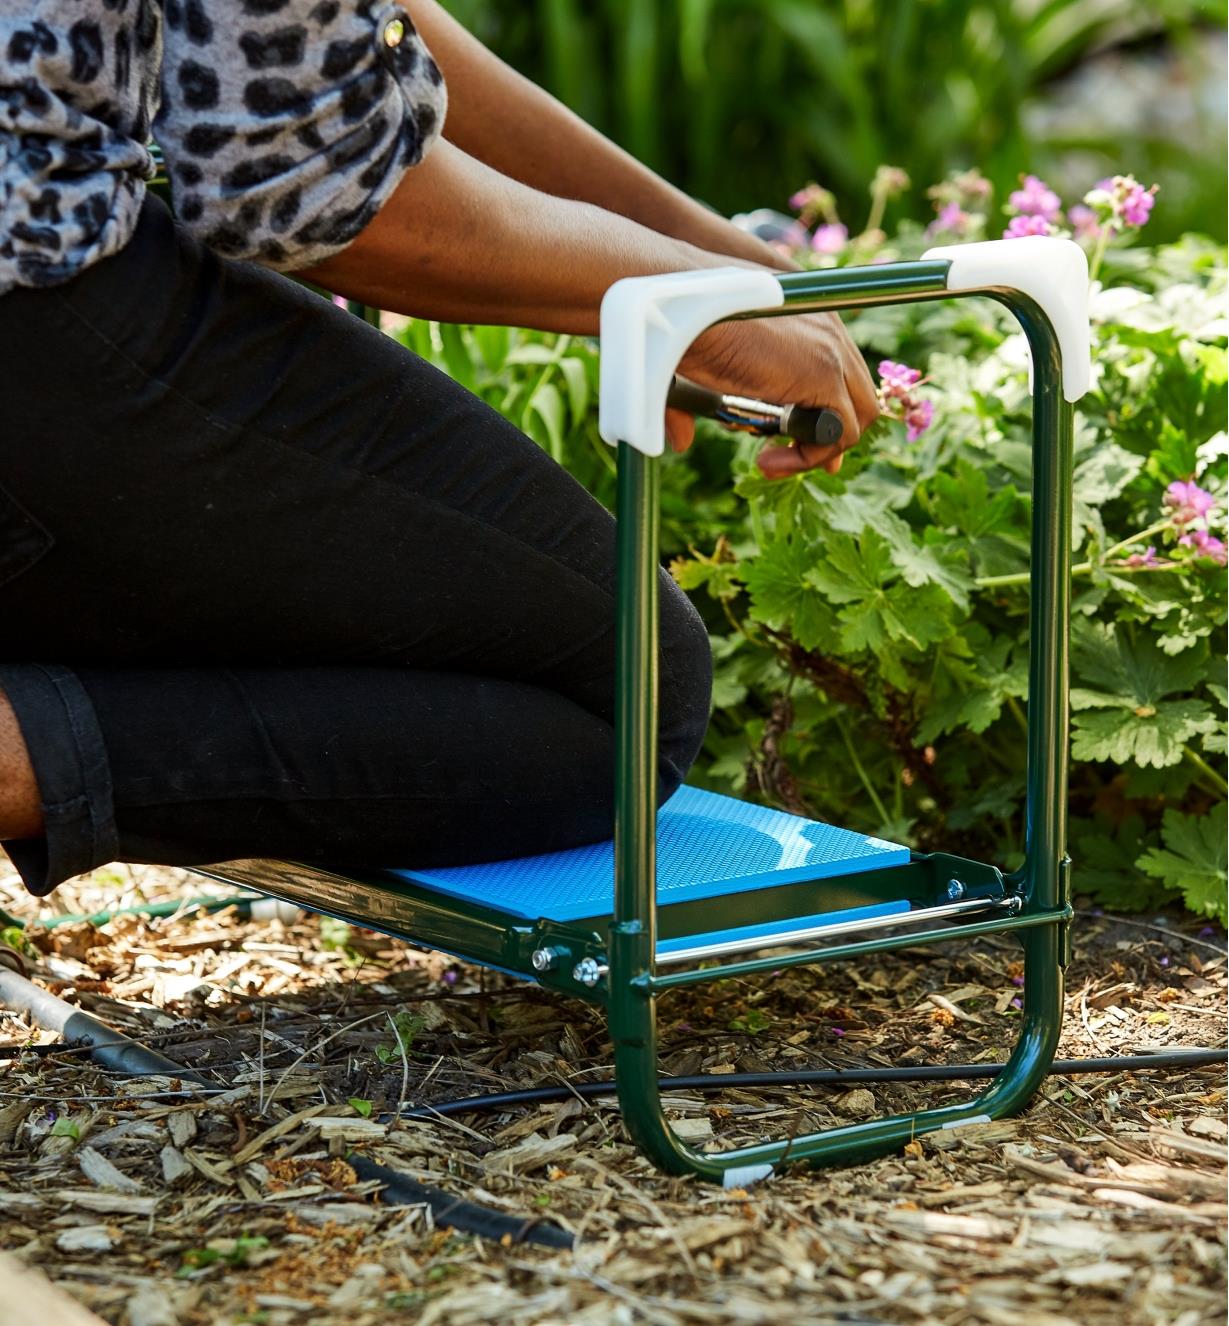 A woman kneels on the folding kneeler stool to tend to garden flowers growing low to the ground